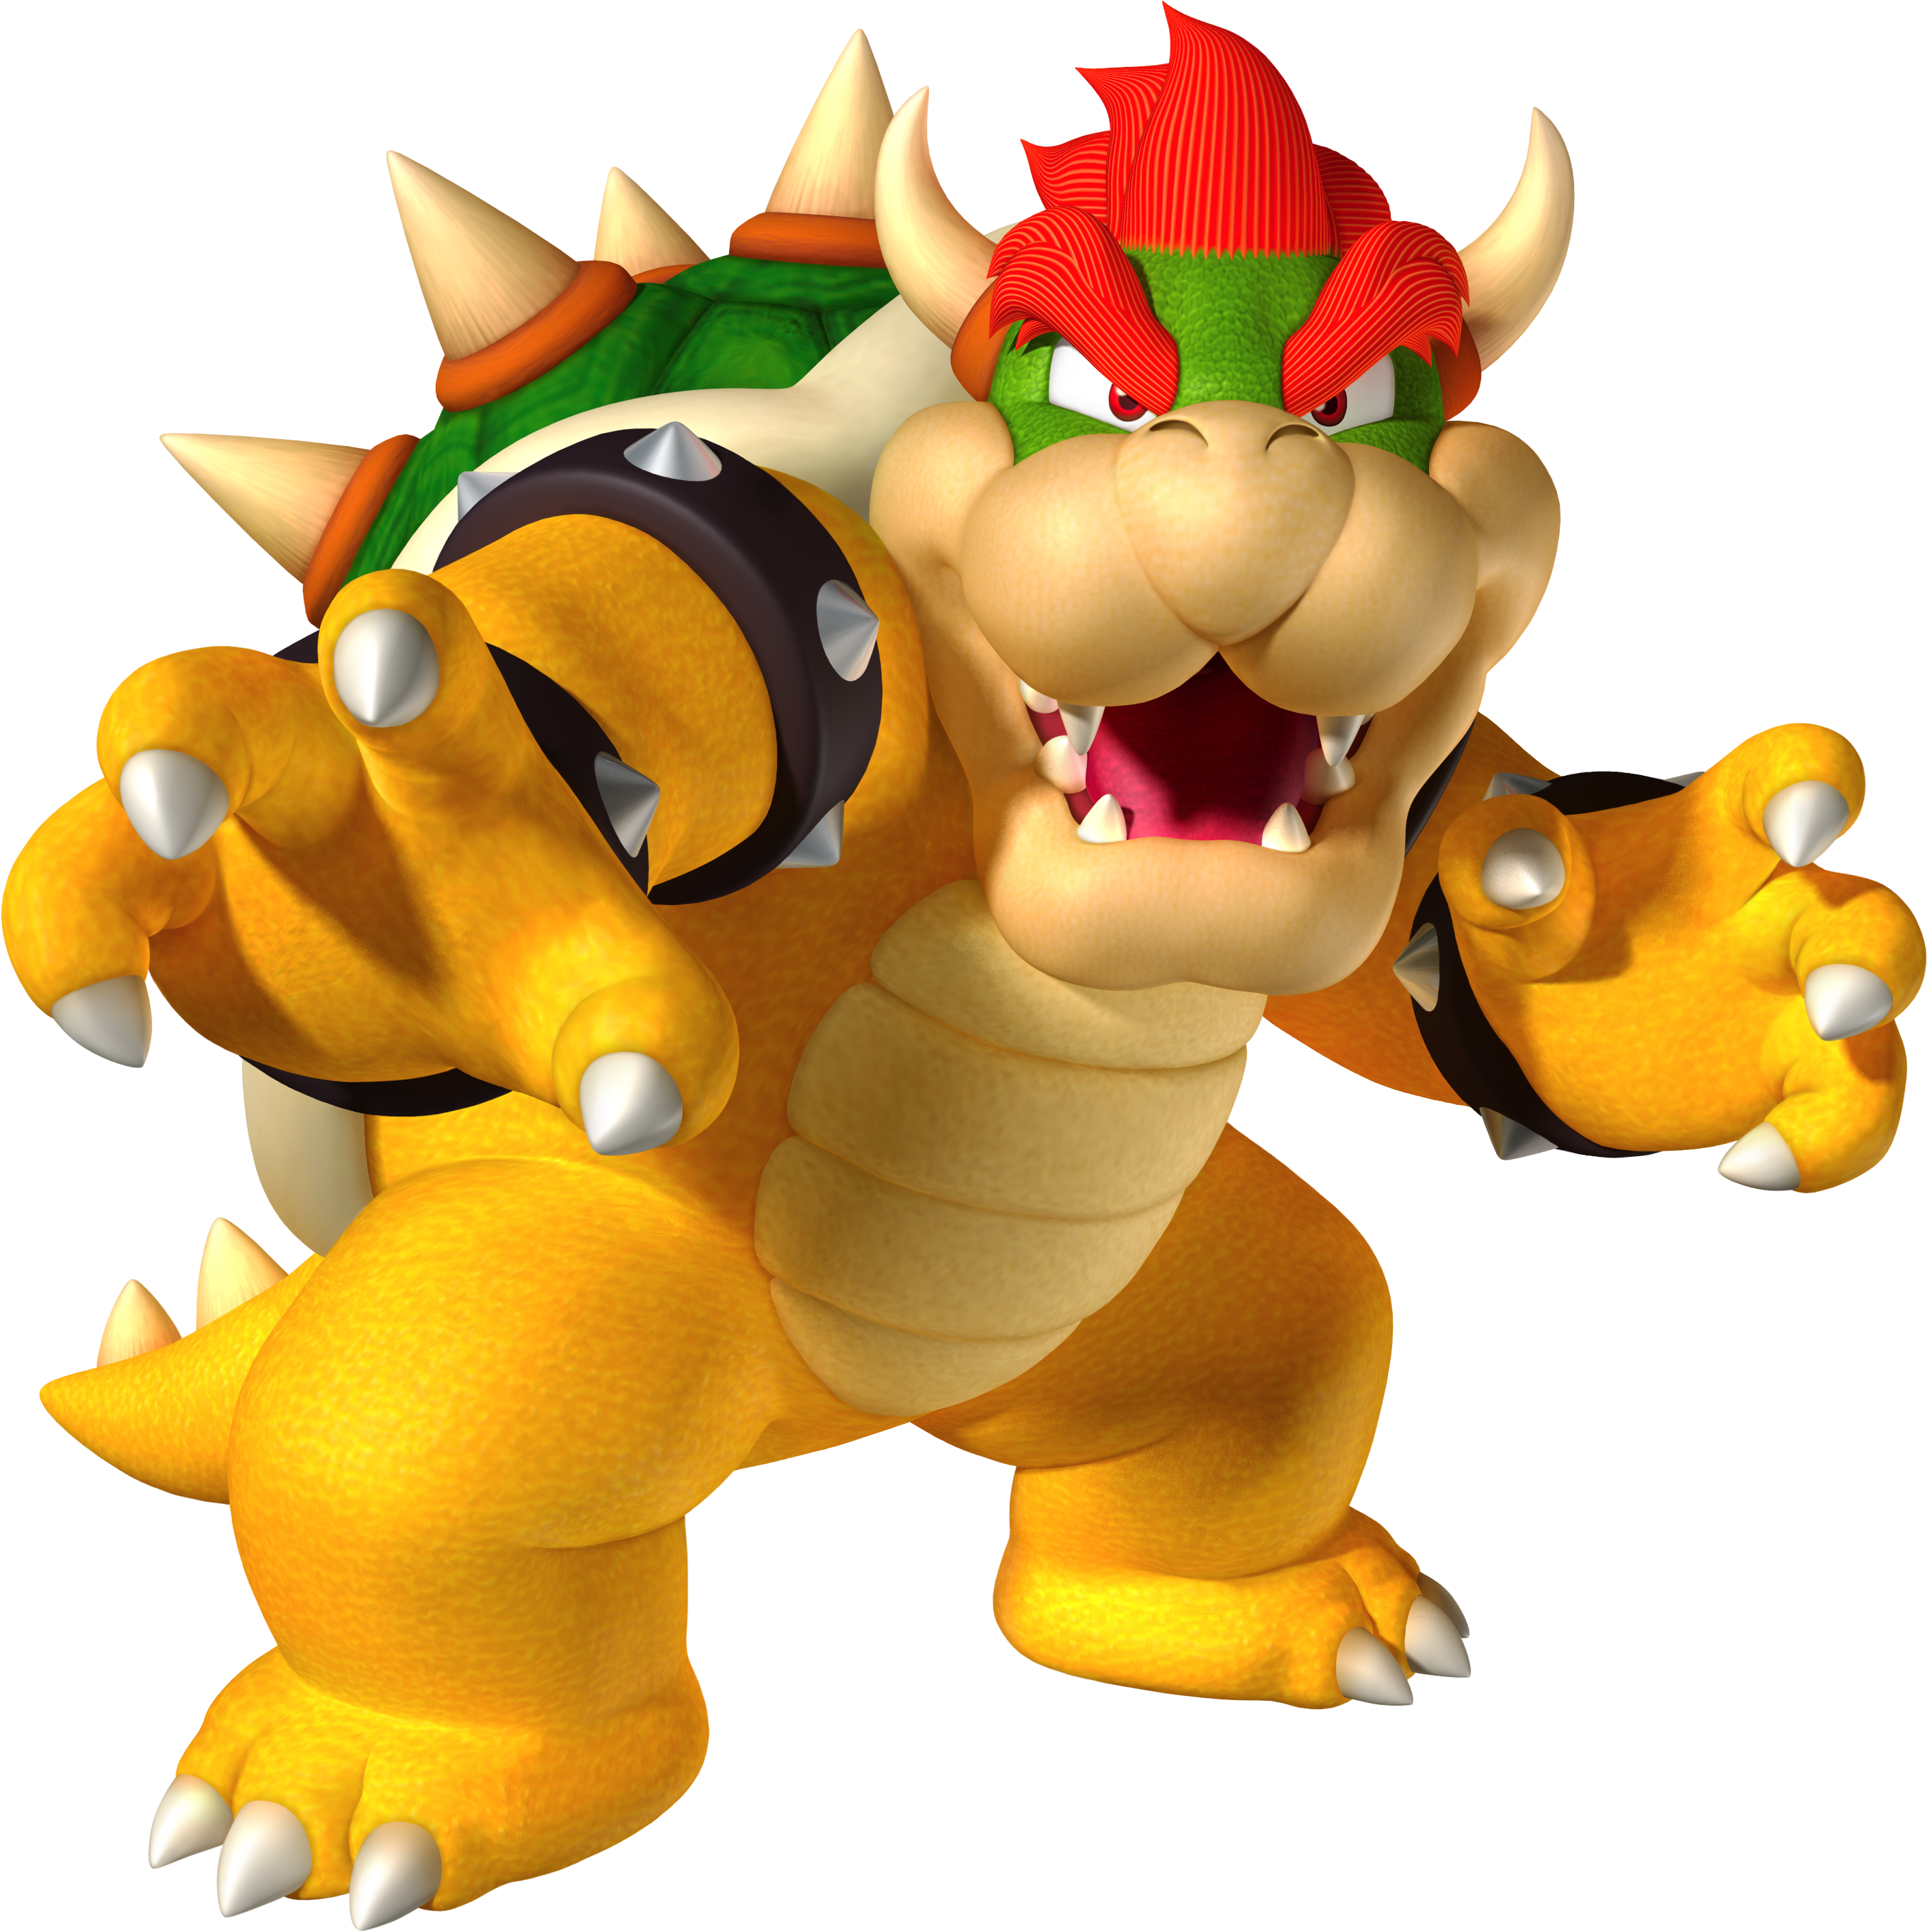 http://images3.wikia.nocookie.net/__cb20130322014816/wreckitralph/images/2/25/Nsmb2_bowser.png